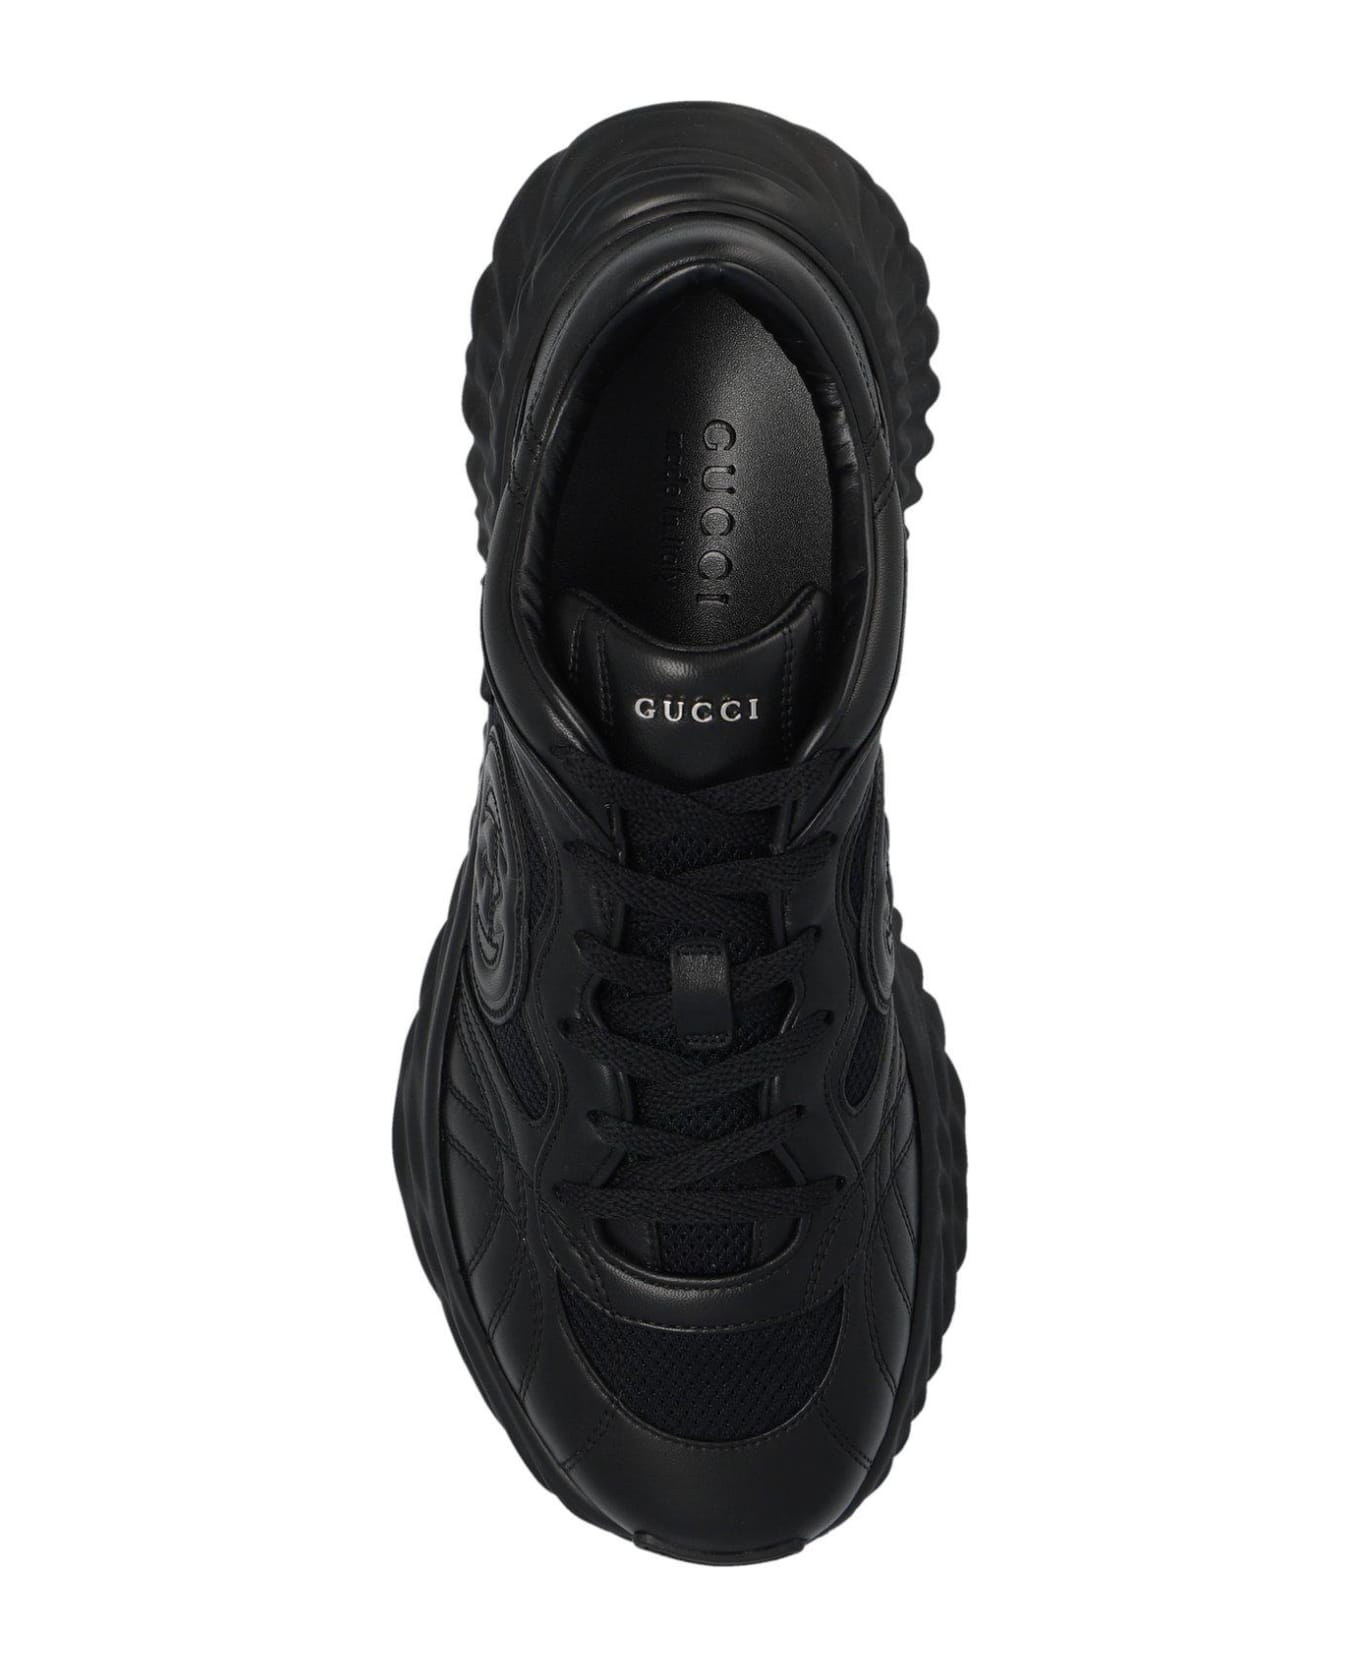 Gucci Gg Ripple Lace-up Sneakers - Black スニーカー